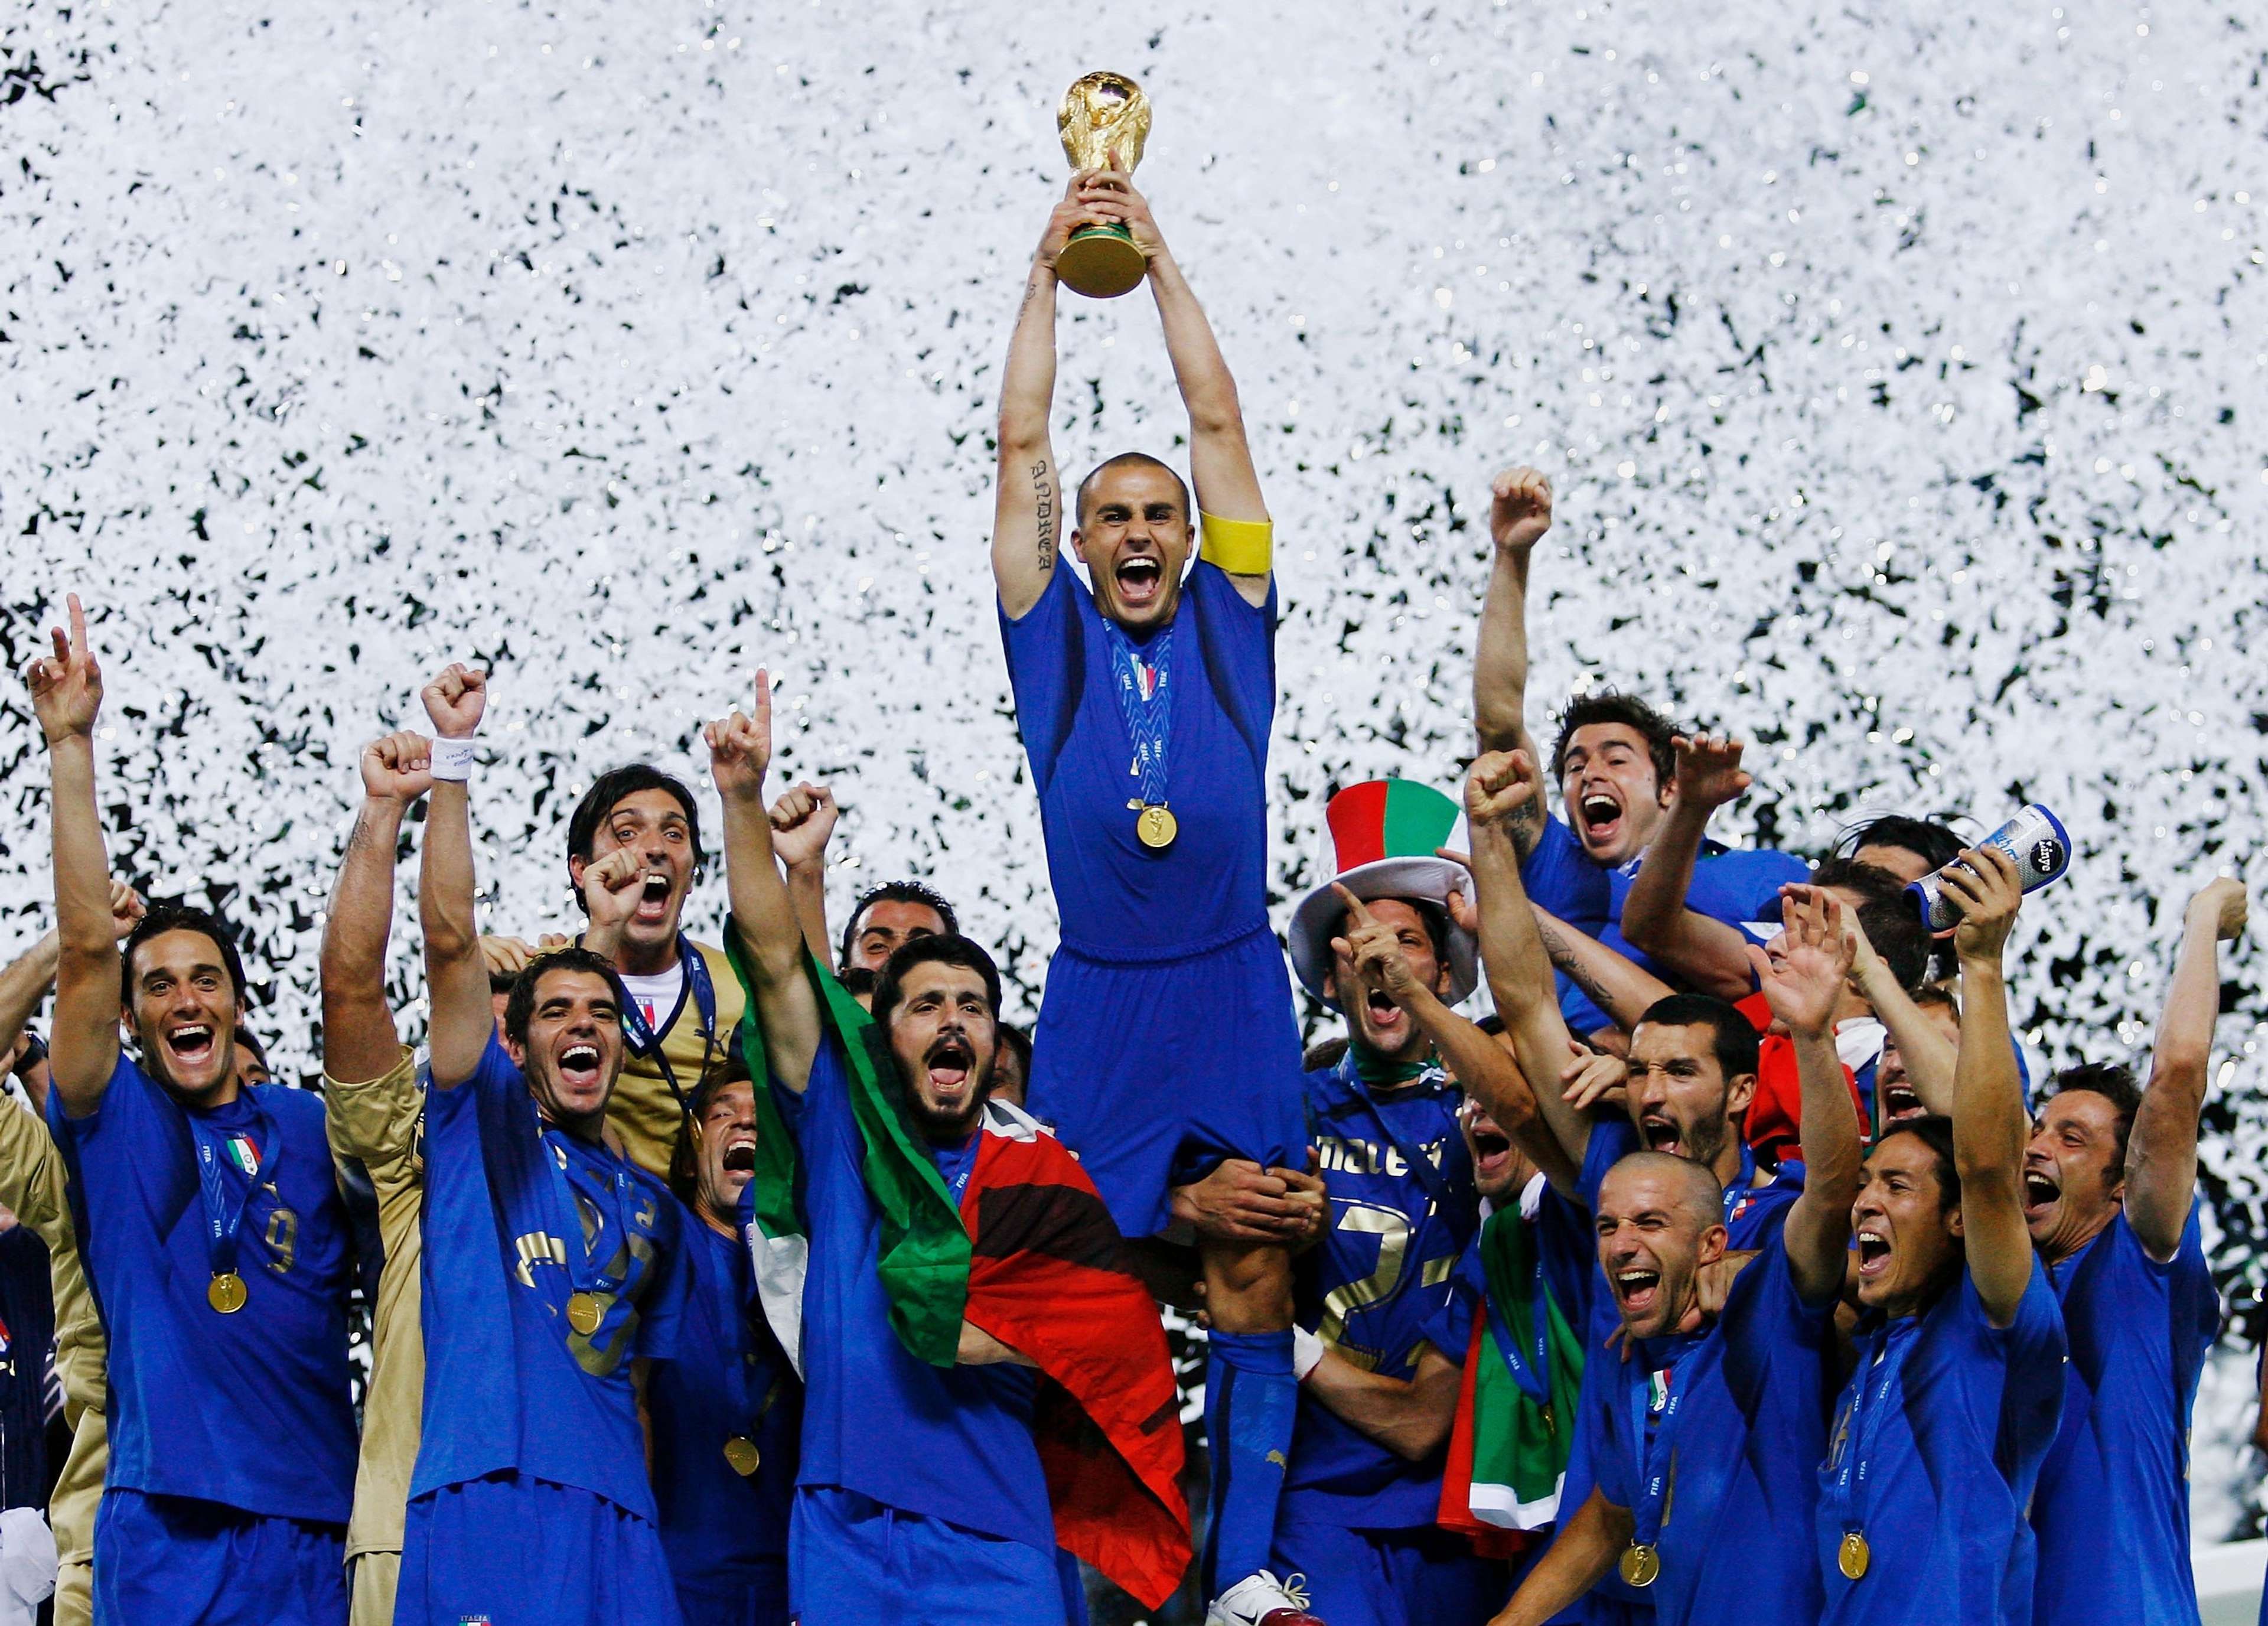 Italy 2006 World Cup